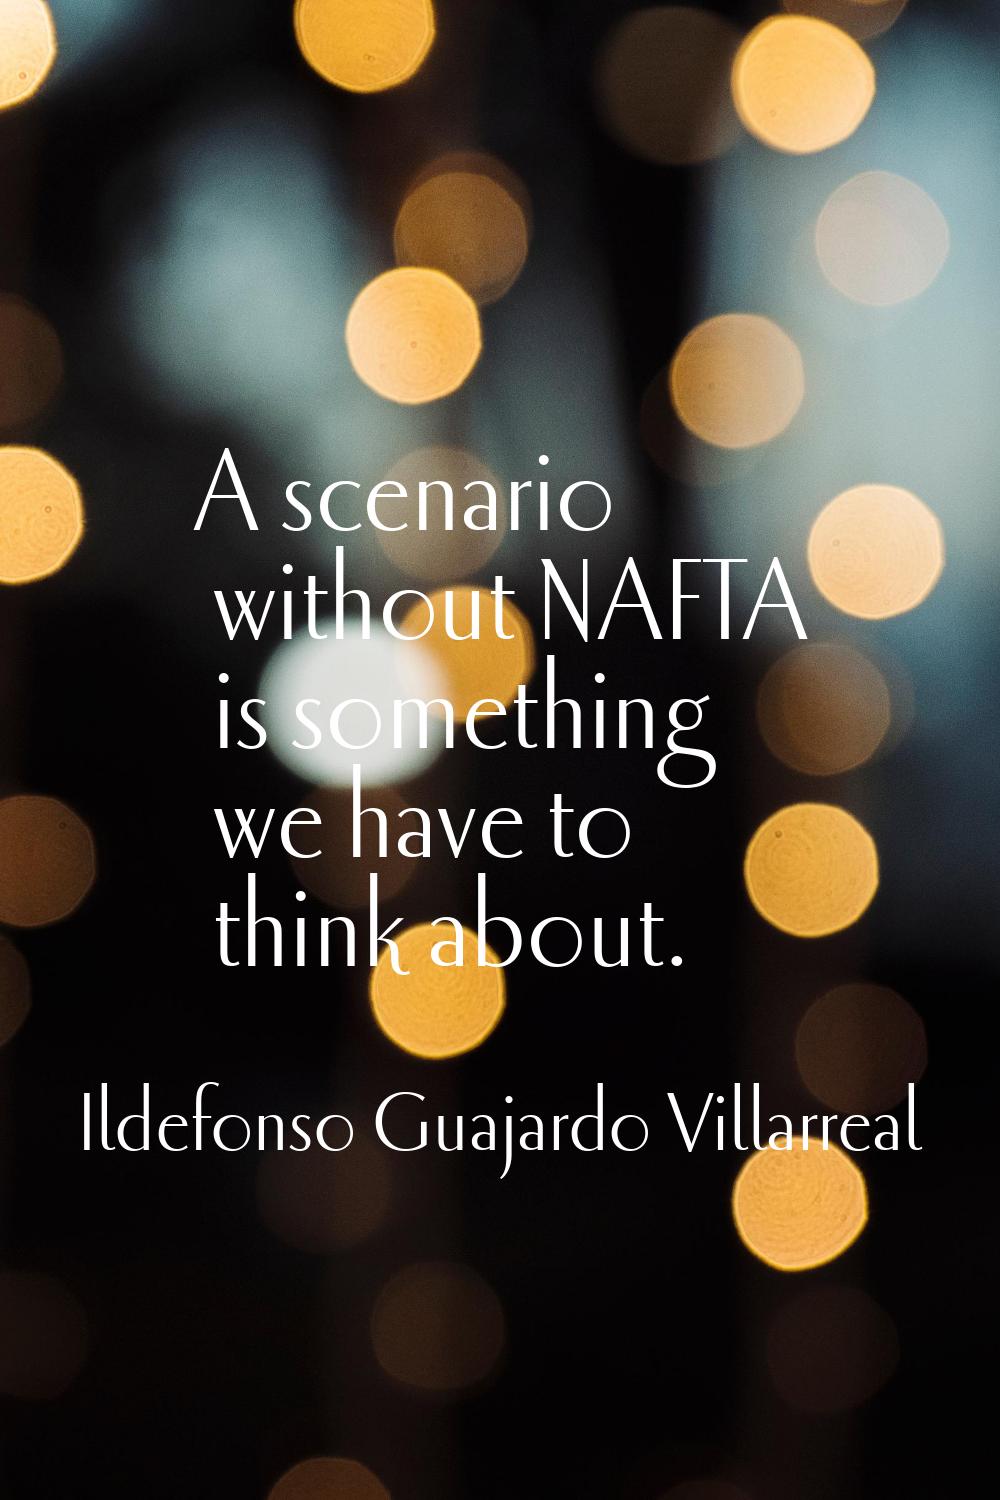 A scenario without NAFTA is something we have to think about.